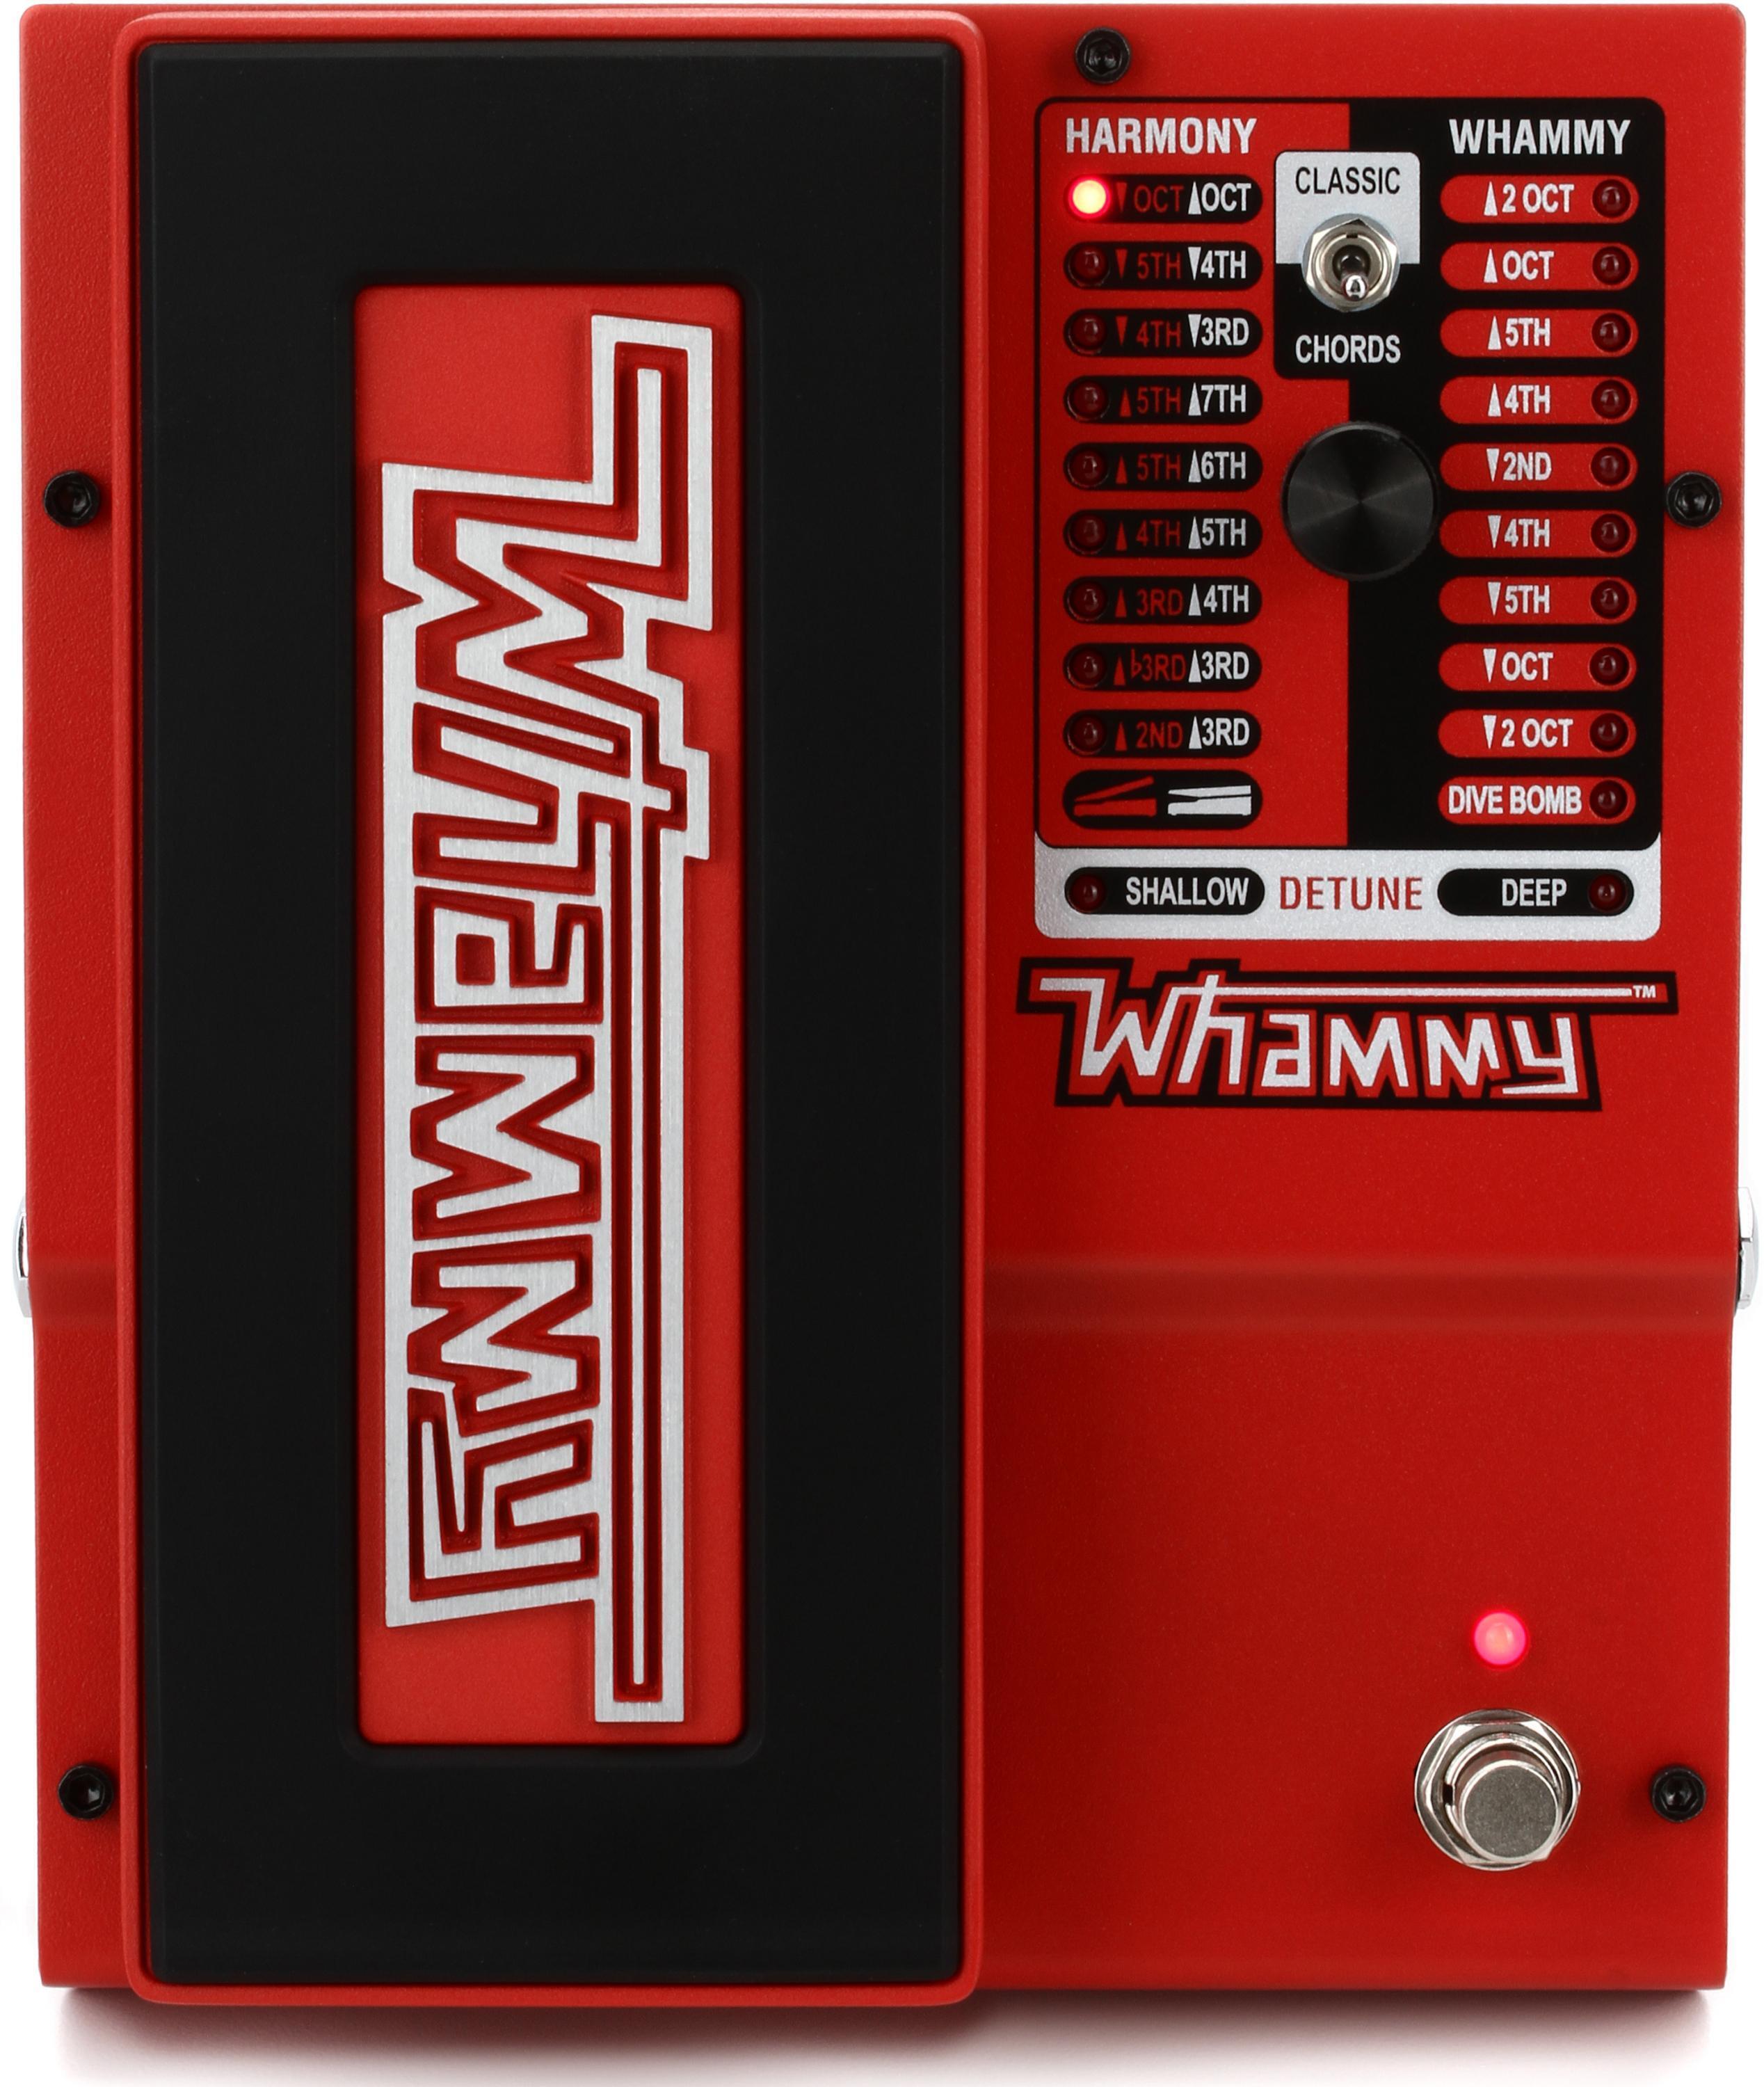 DigiTech Whammy 5 Pitch Shift Pedal | Sweetwater